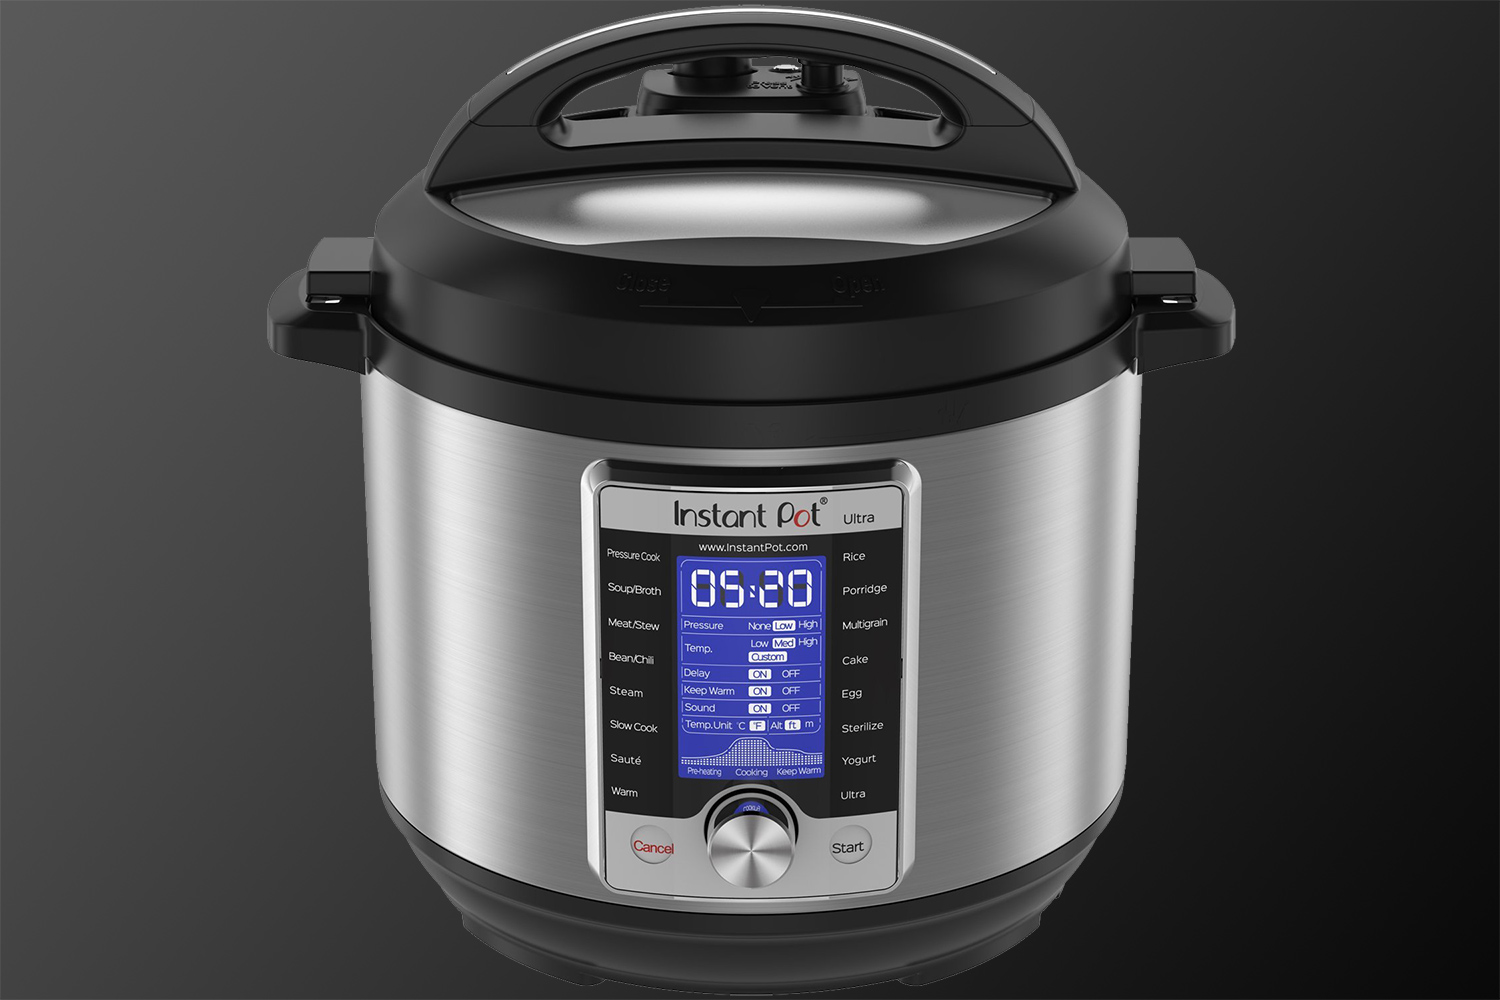  Instant Pot Ultra  is the company s best multi use cooker 